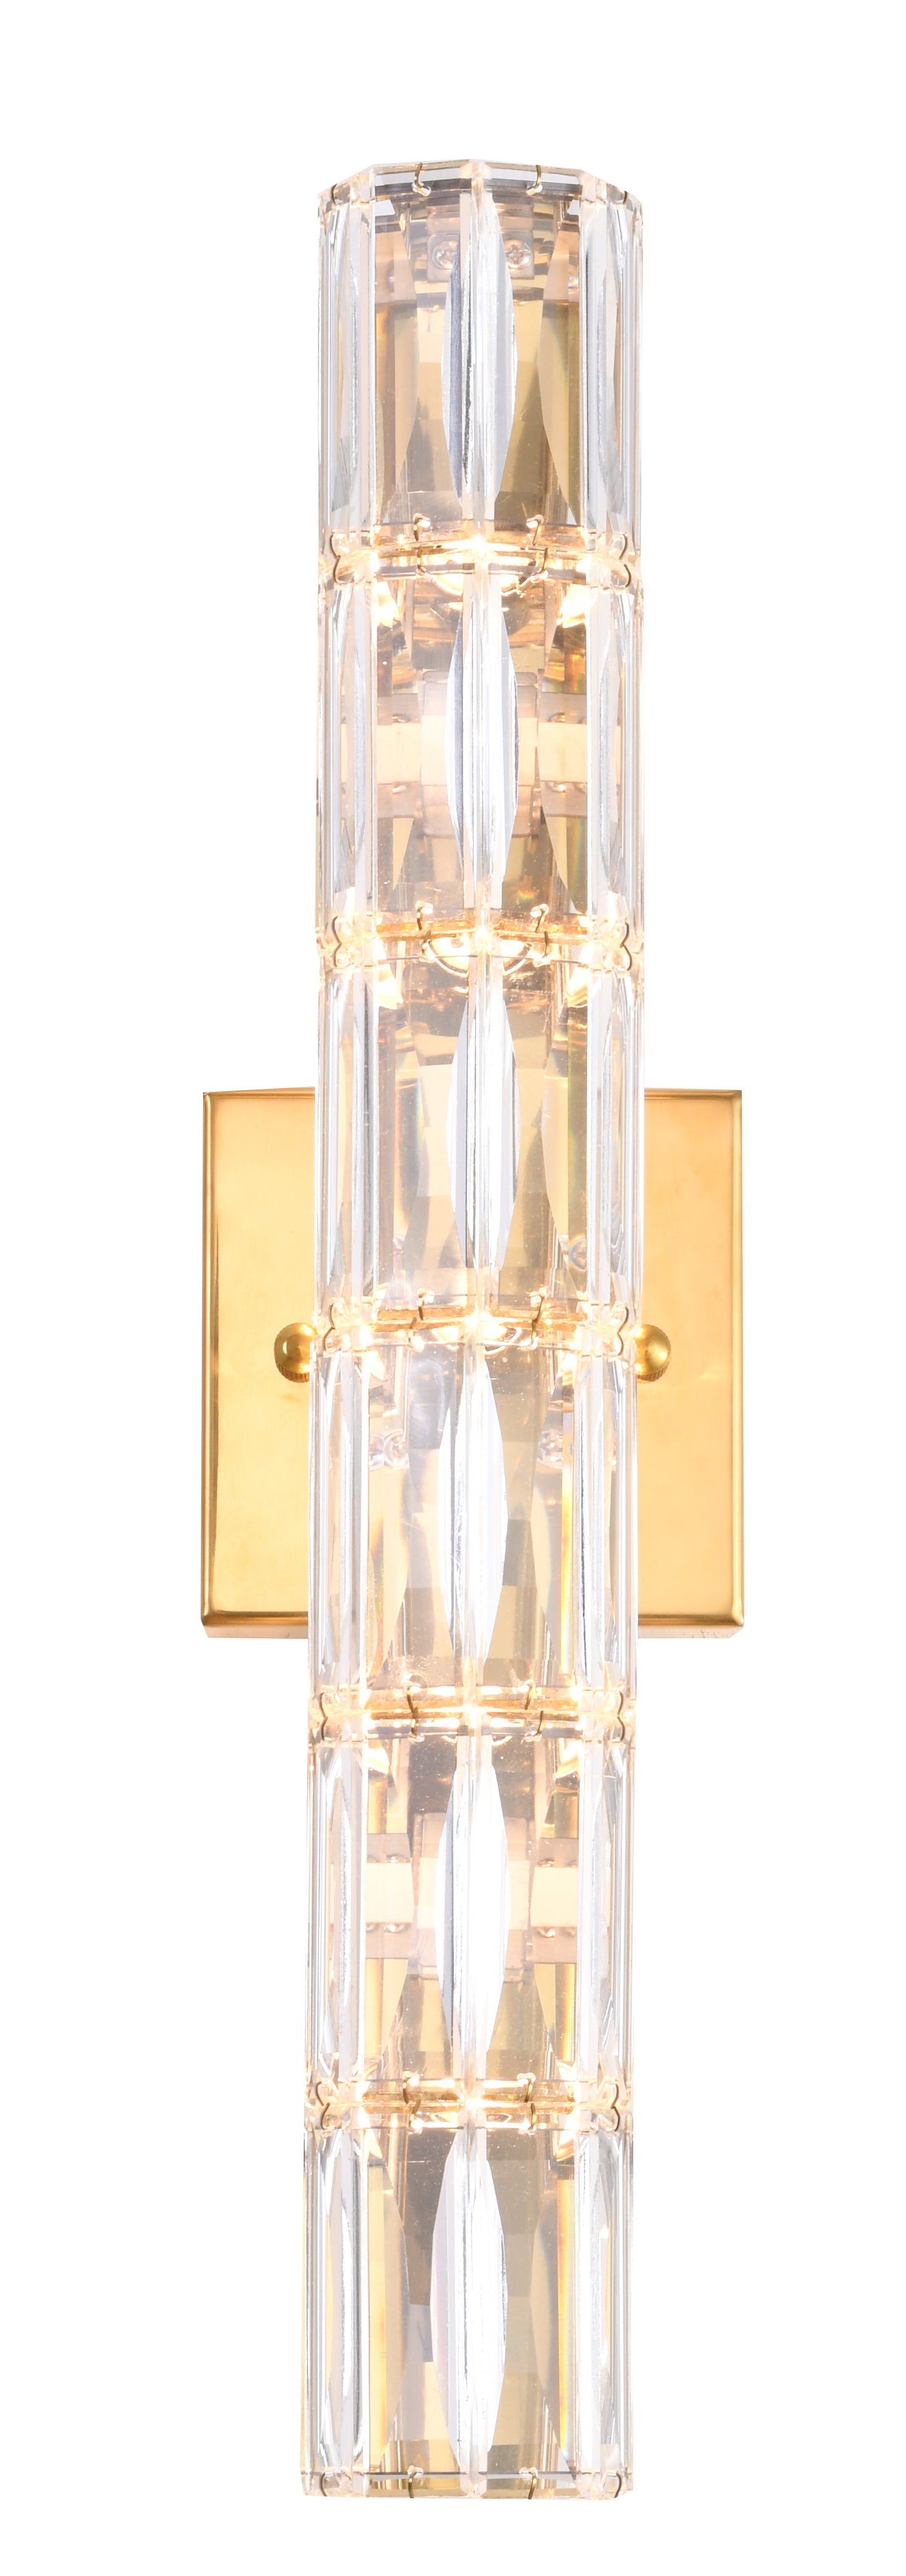 Bethel Gold Wall Sconce in Metal  Crystal – English Elm